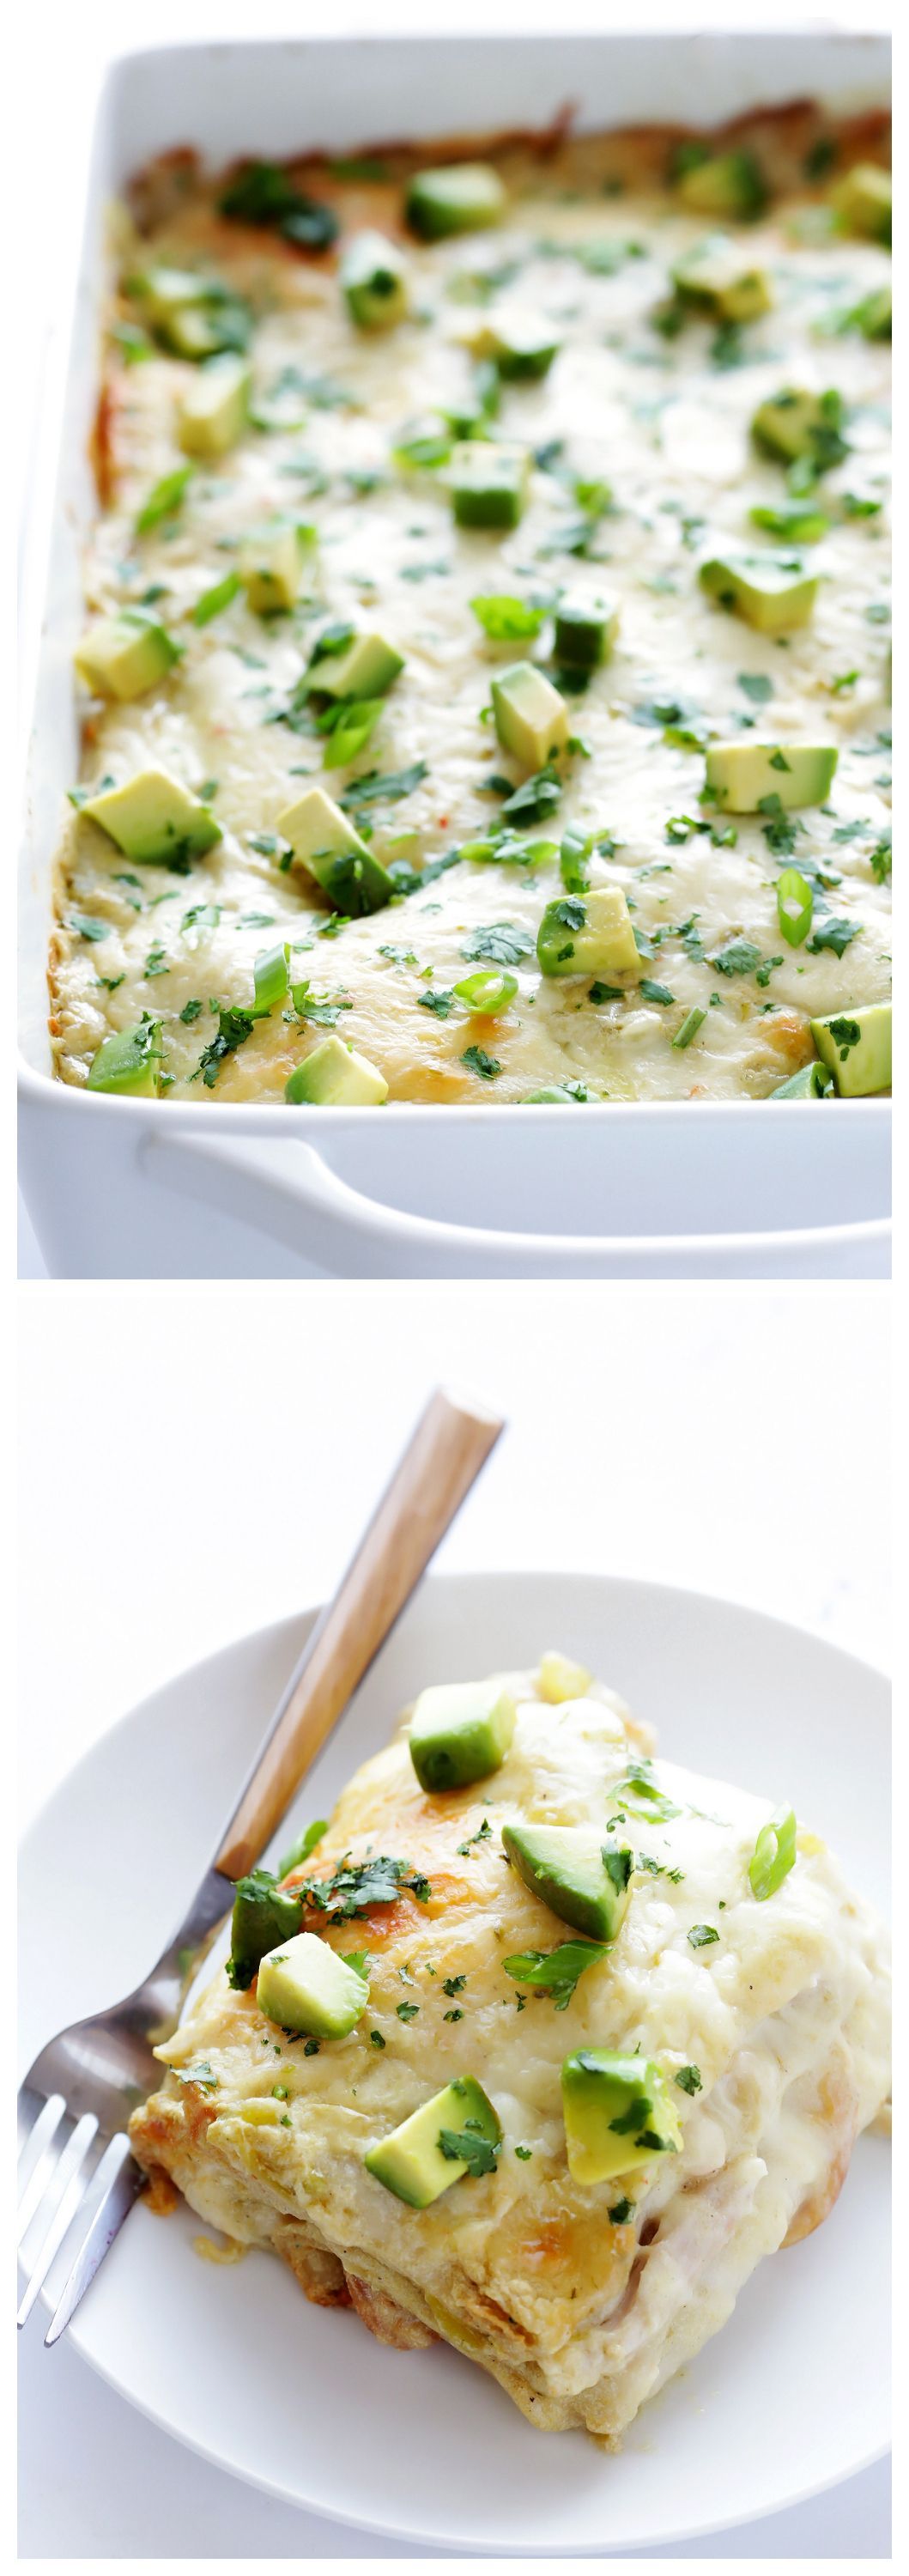 White Chicken Enchilada Casserole — made with a lighter cream sauce, SO tasty! | gimmesomeoven.com #mexic